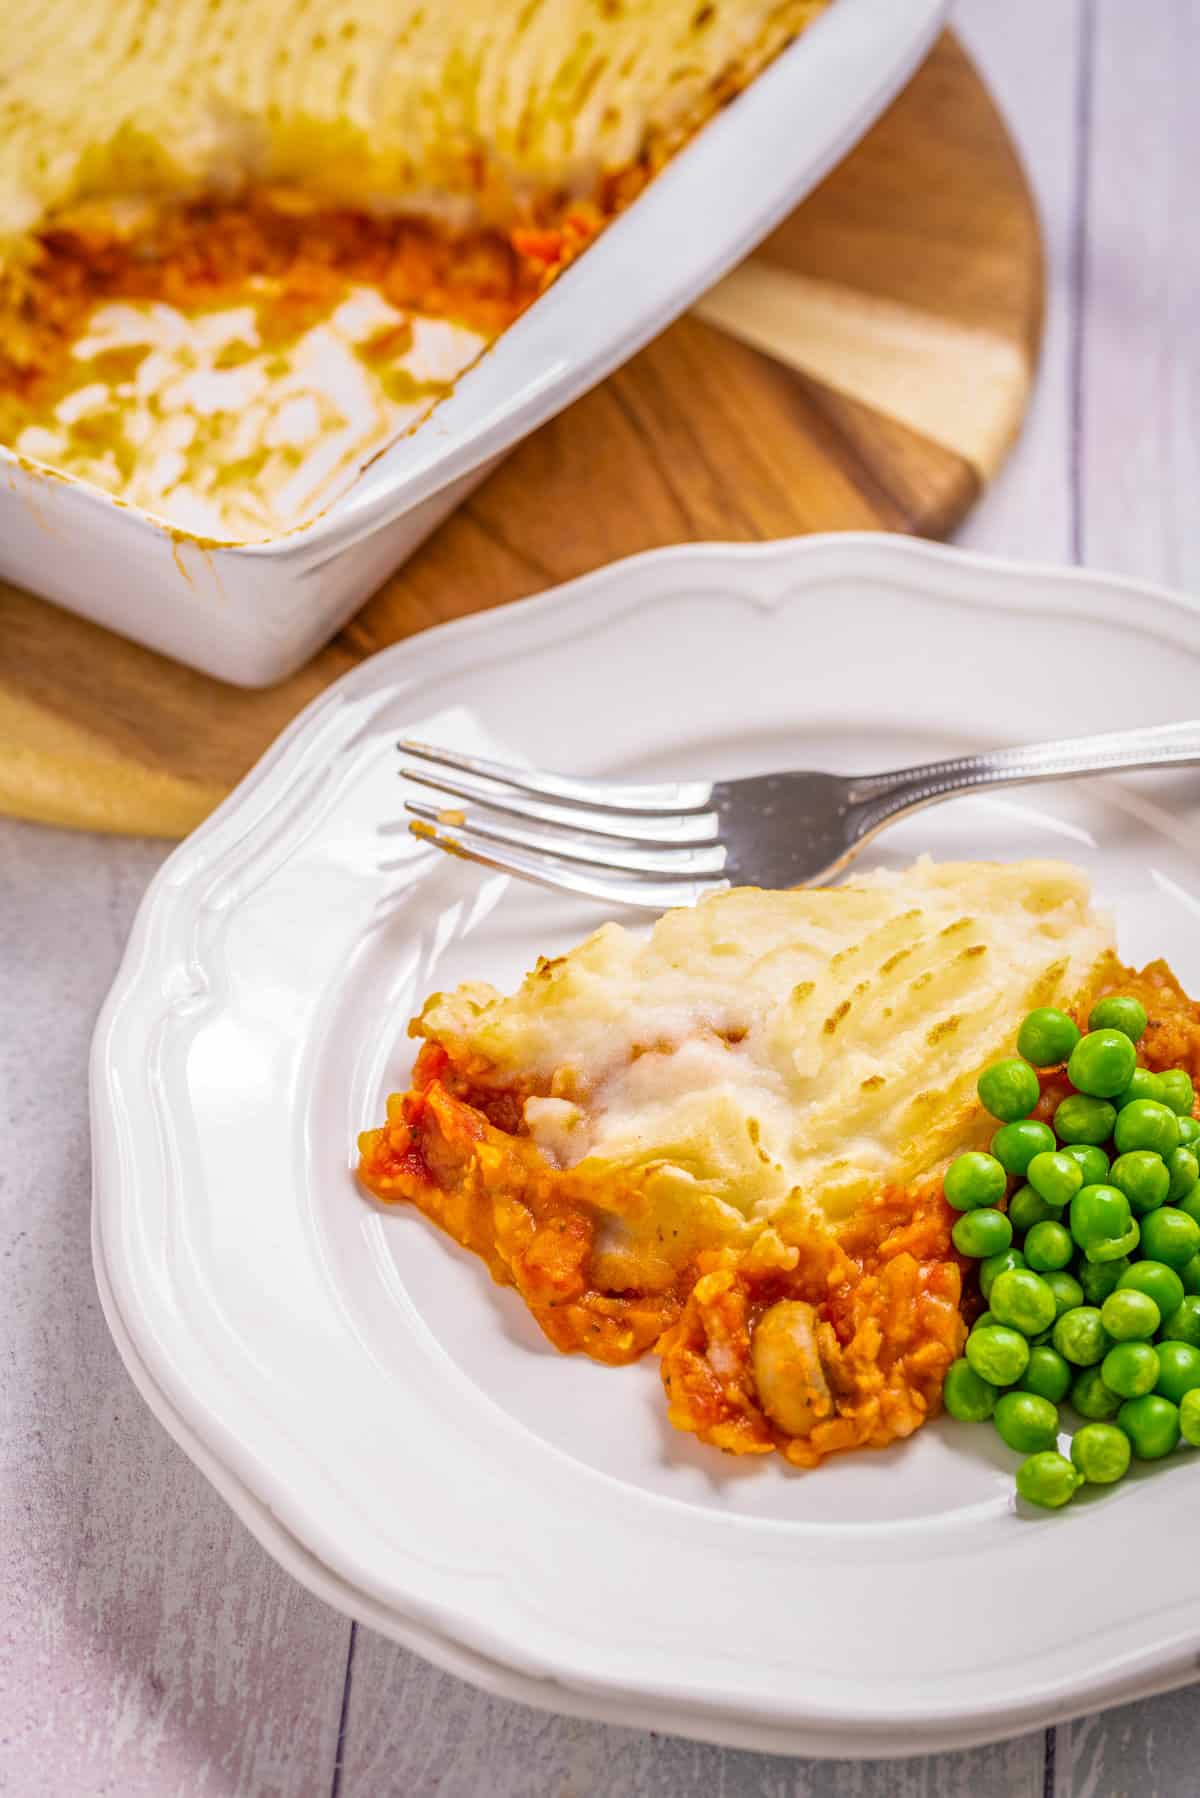 Overhead close-up view of a portion of vegan shepherd's pie with peas and fork on the sides placed on a white plate.